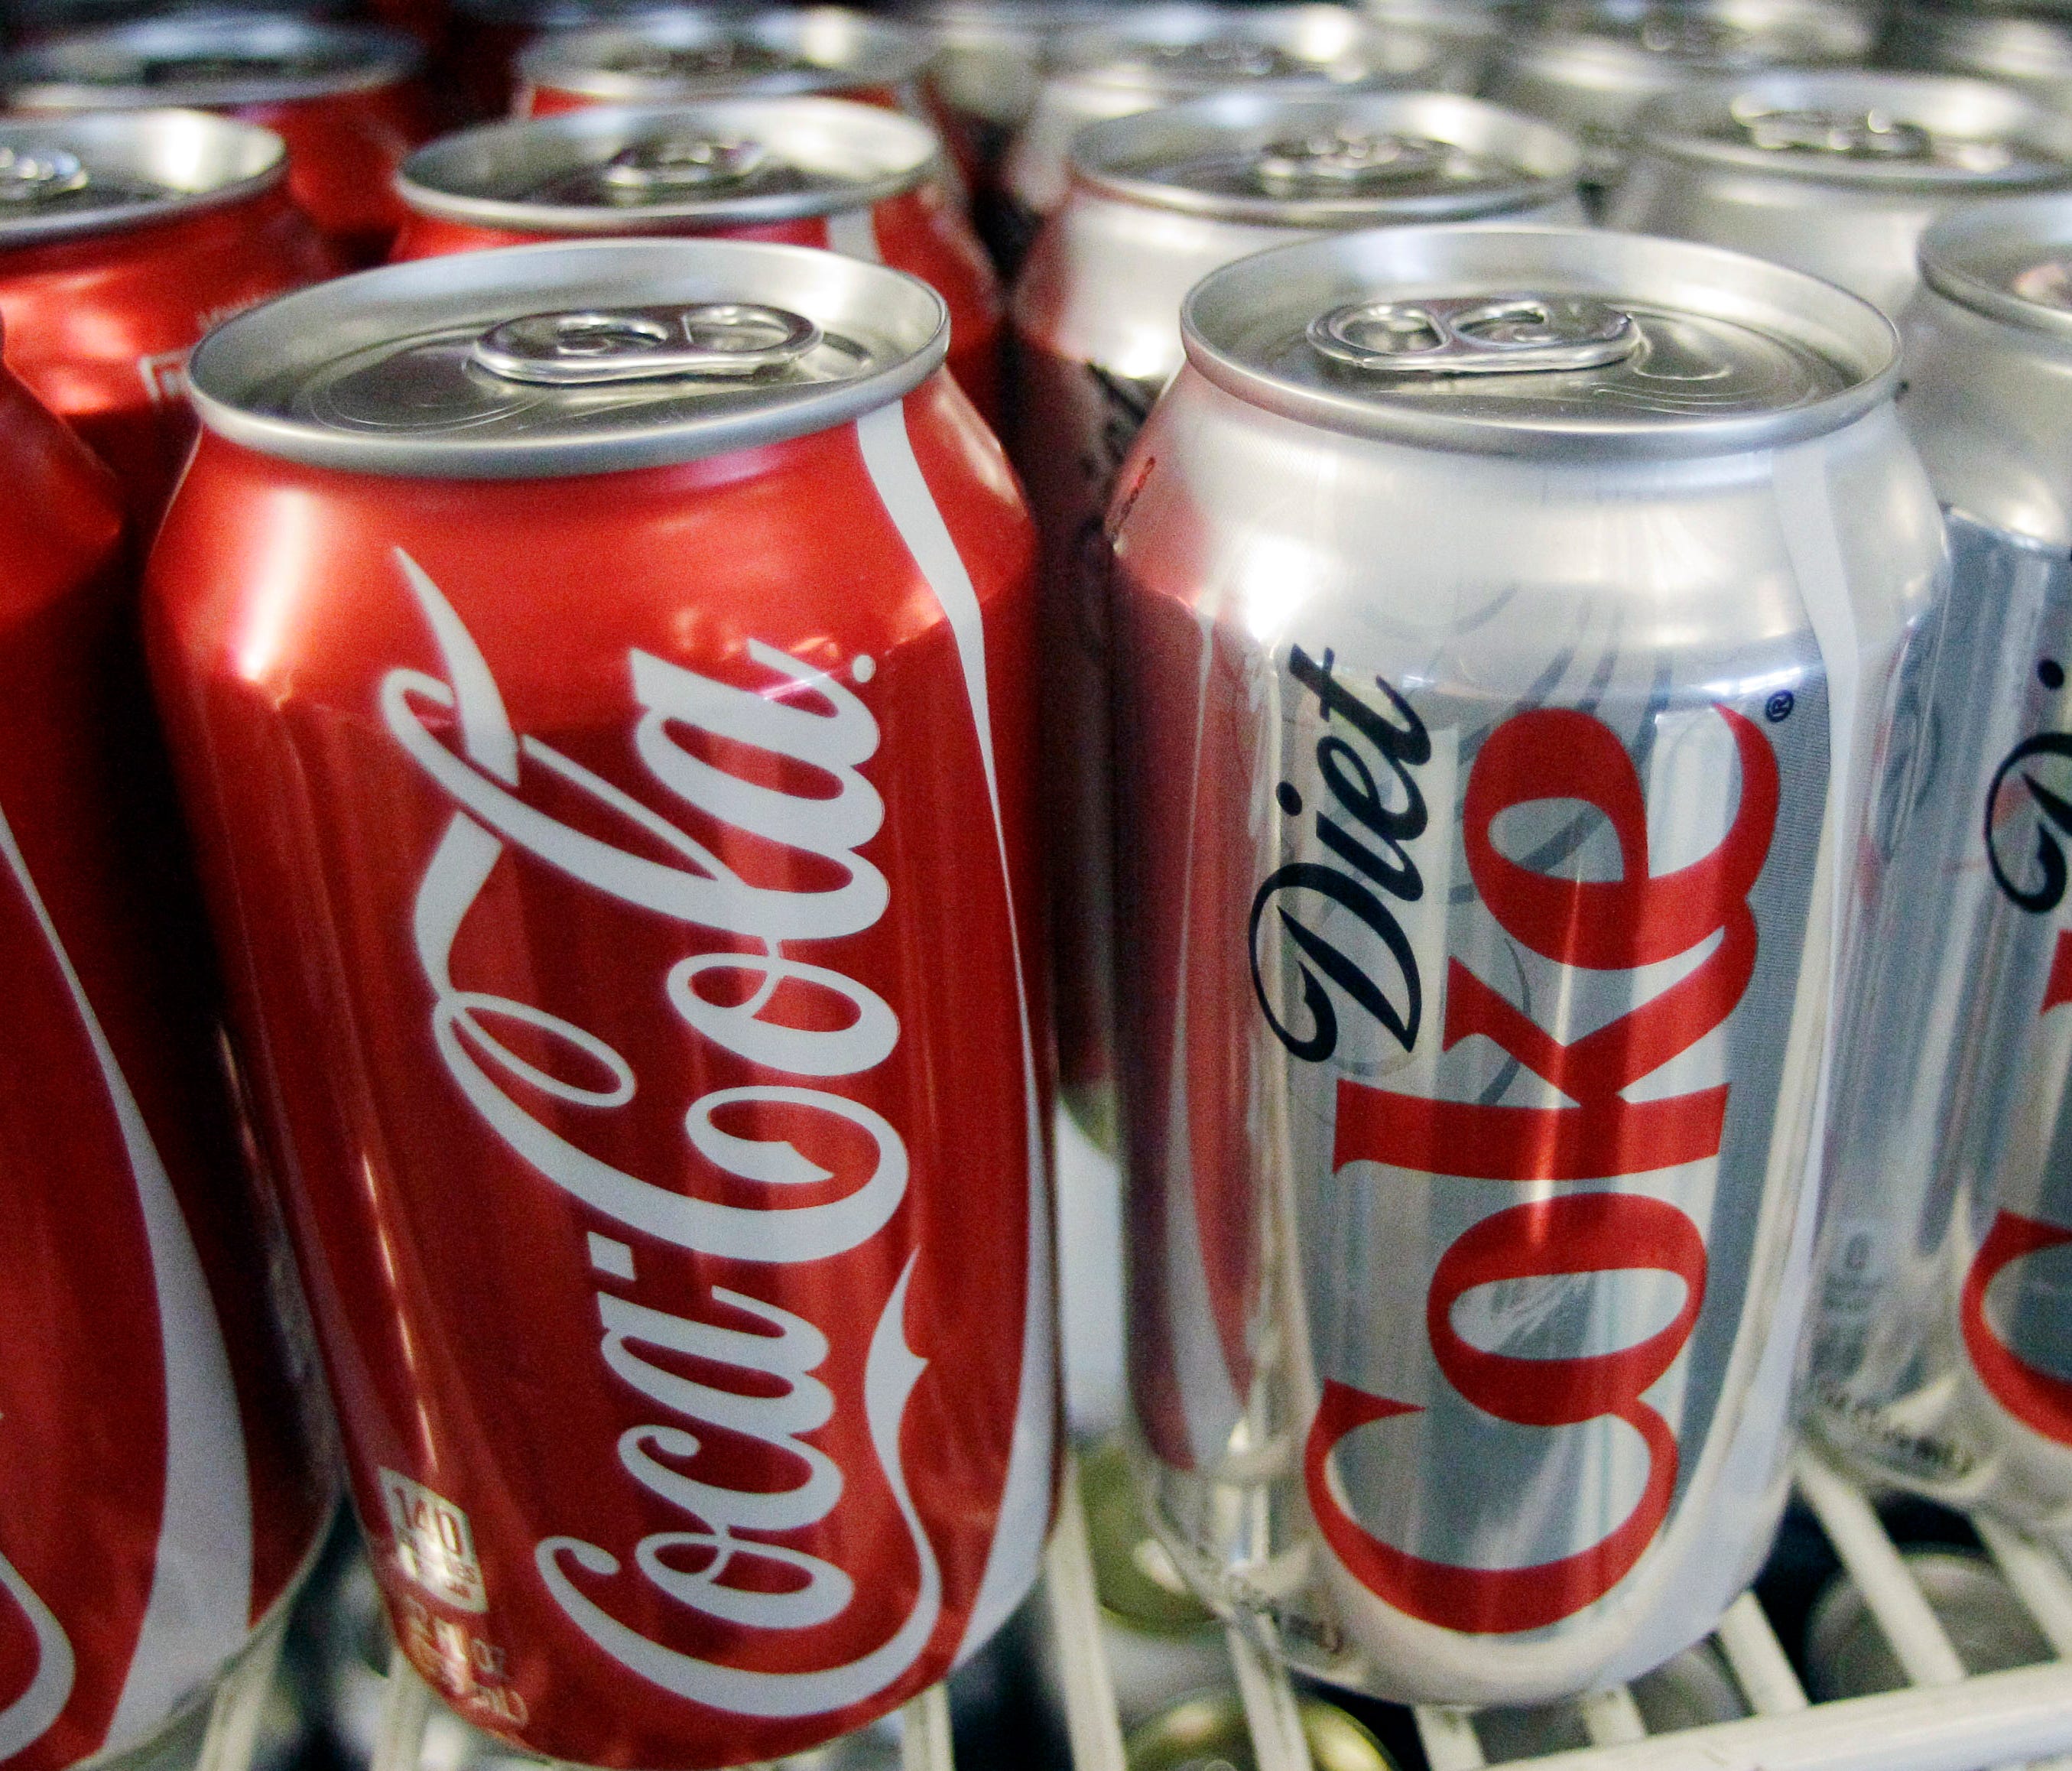 This file photo taken in 2011 shows cans of Coca-Cola and Diet Coke in a cooler at Anne's Deli in Portland, Ore.